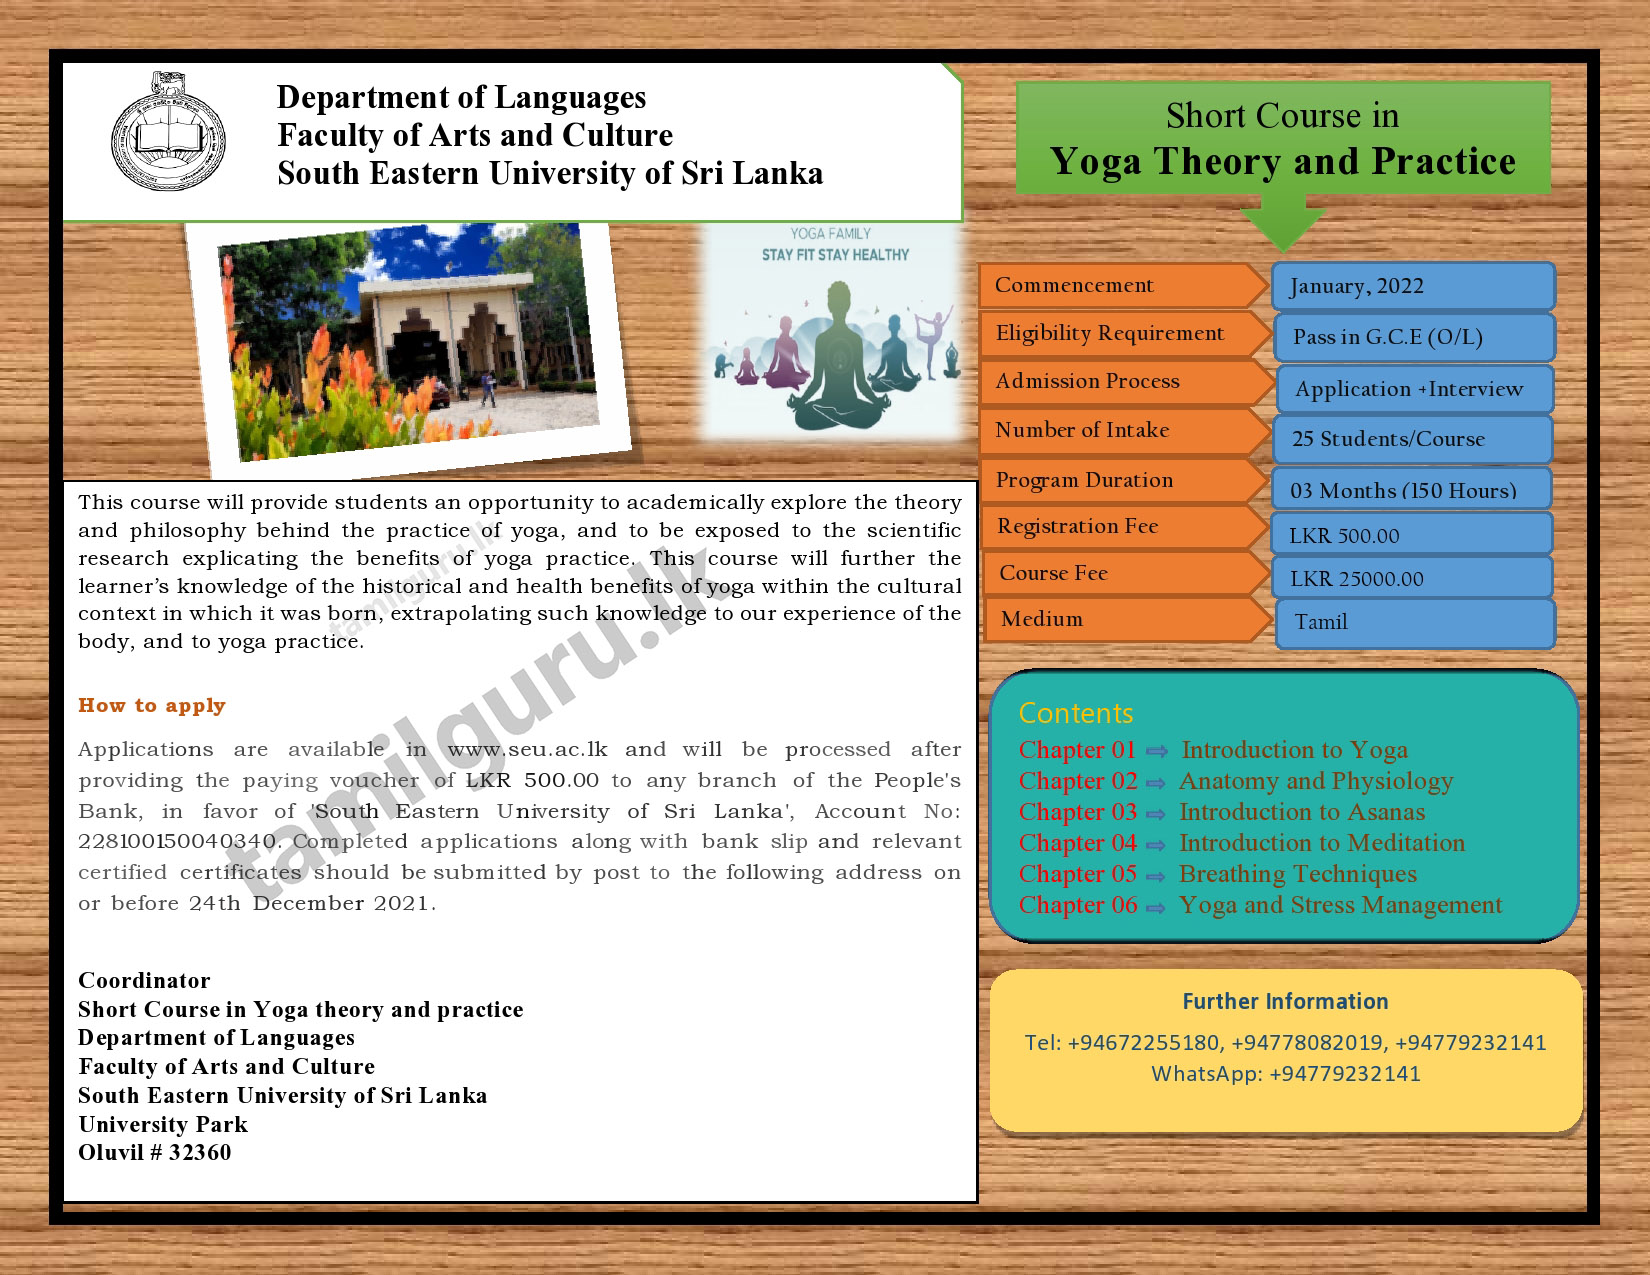 Short Course in Yoga Theory and Practice 2021 - South Eastern University of Sri Lanka (SEUSL)